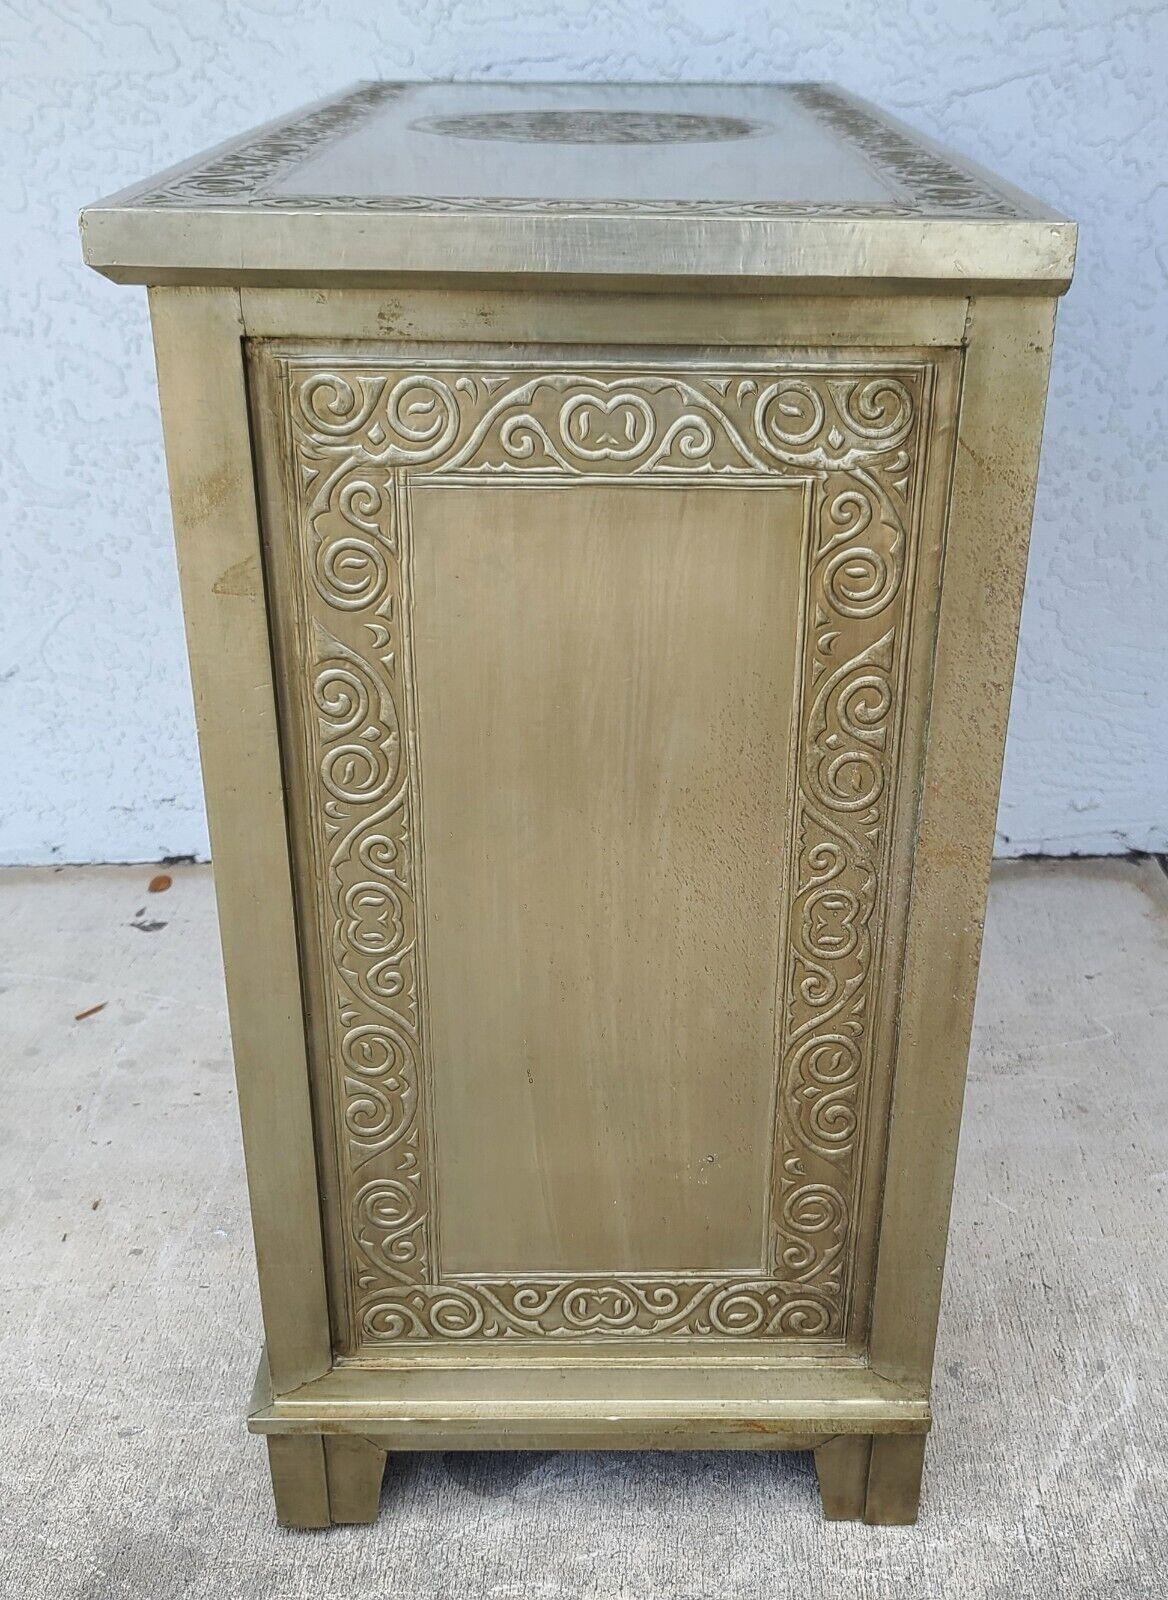 Late 20th Century Art Nouveau French Decorative Embossed Metal Wrapped Dresser Commode